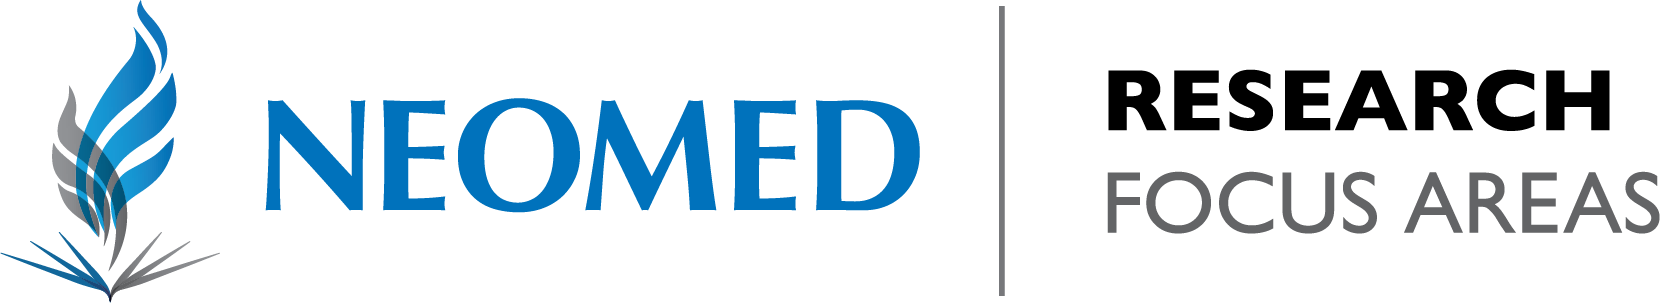 NEOMED Research Focus Areas logo